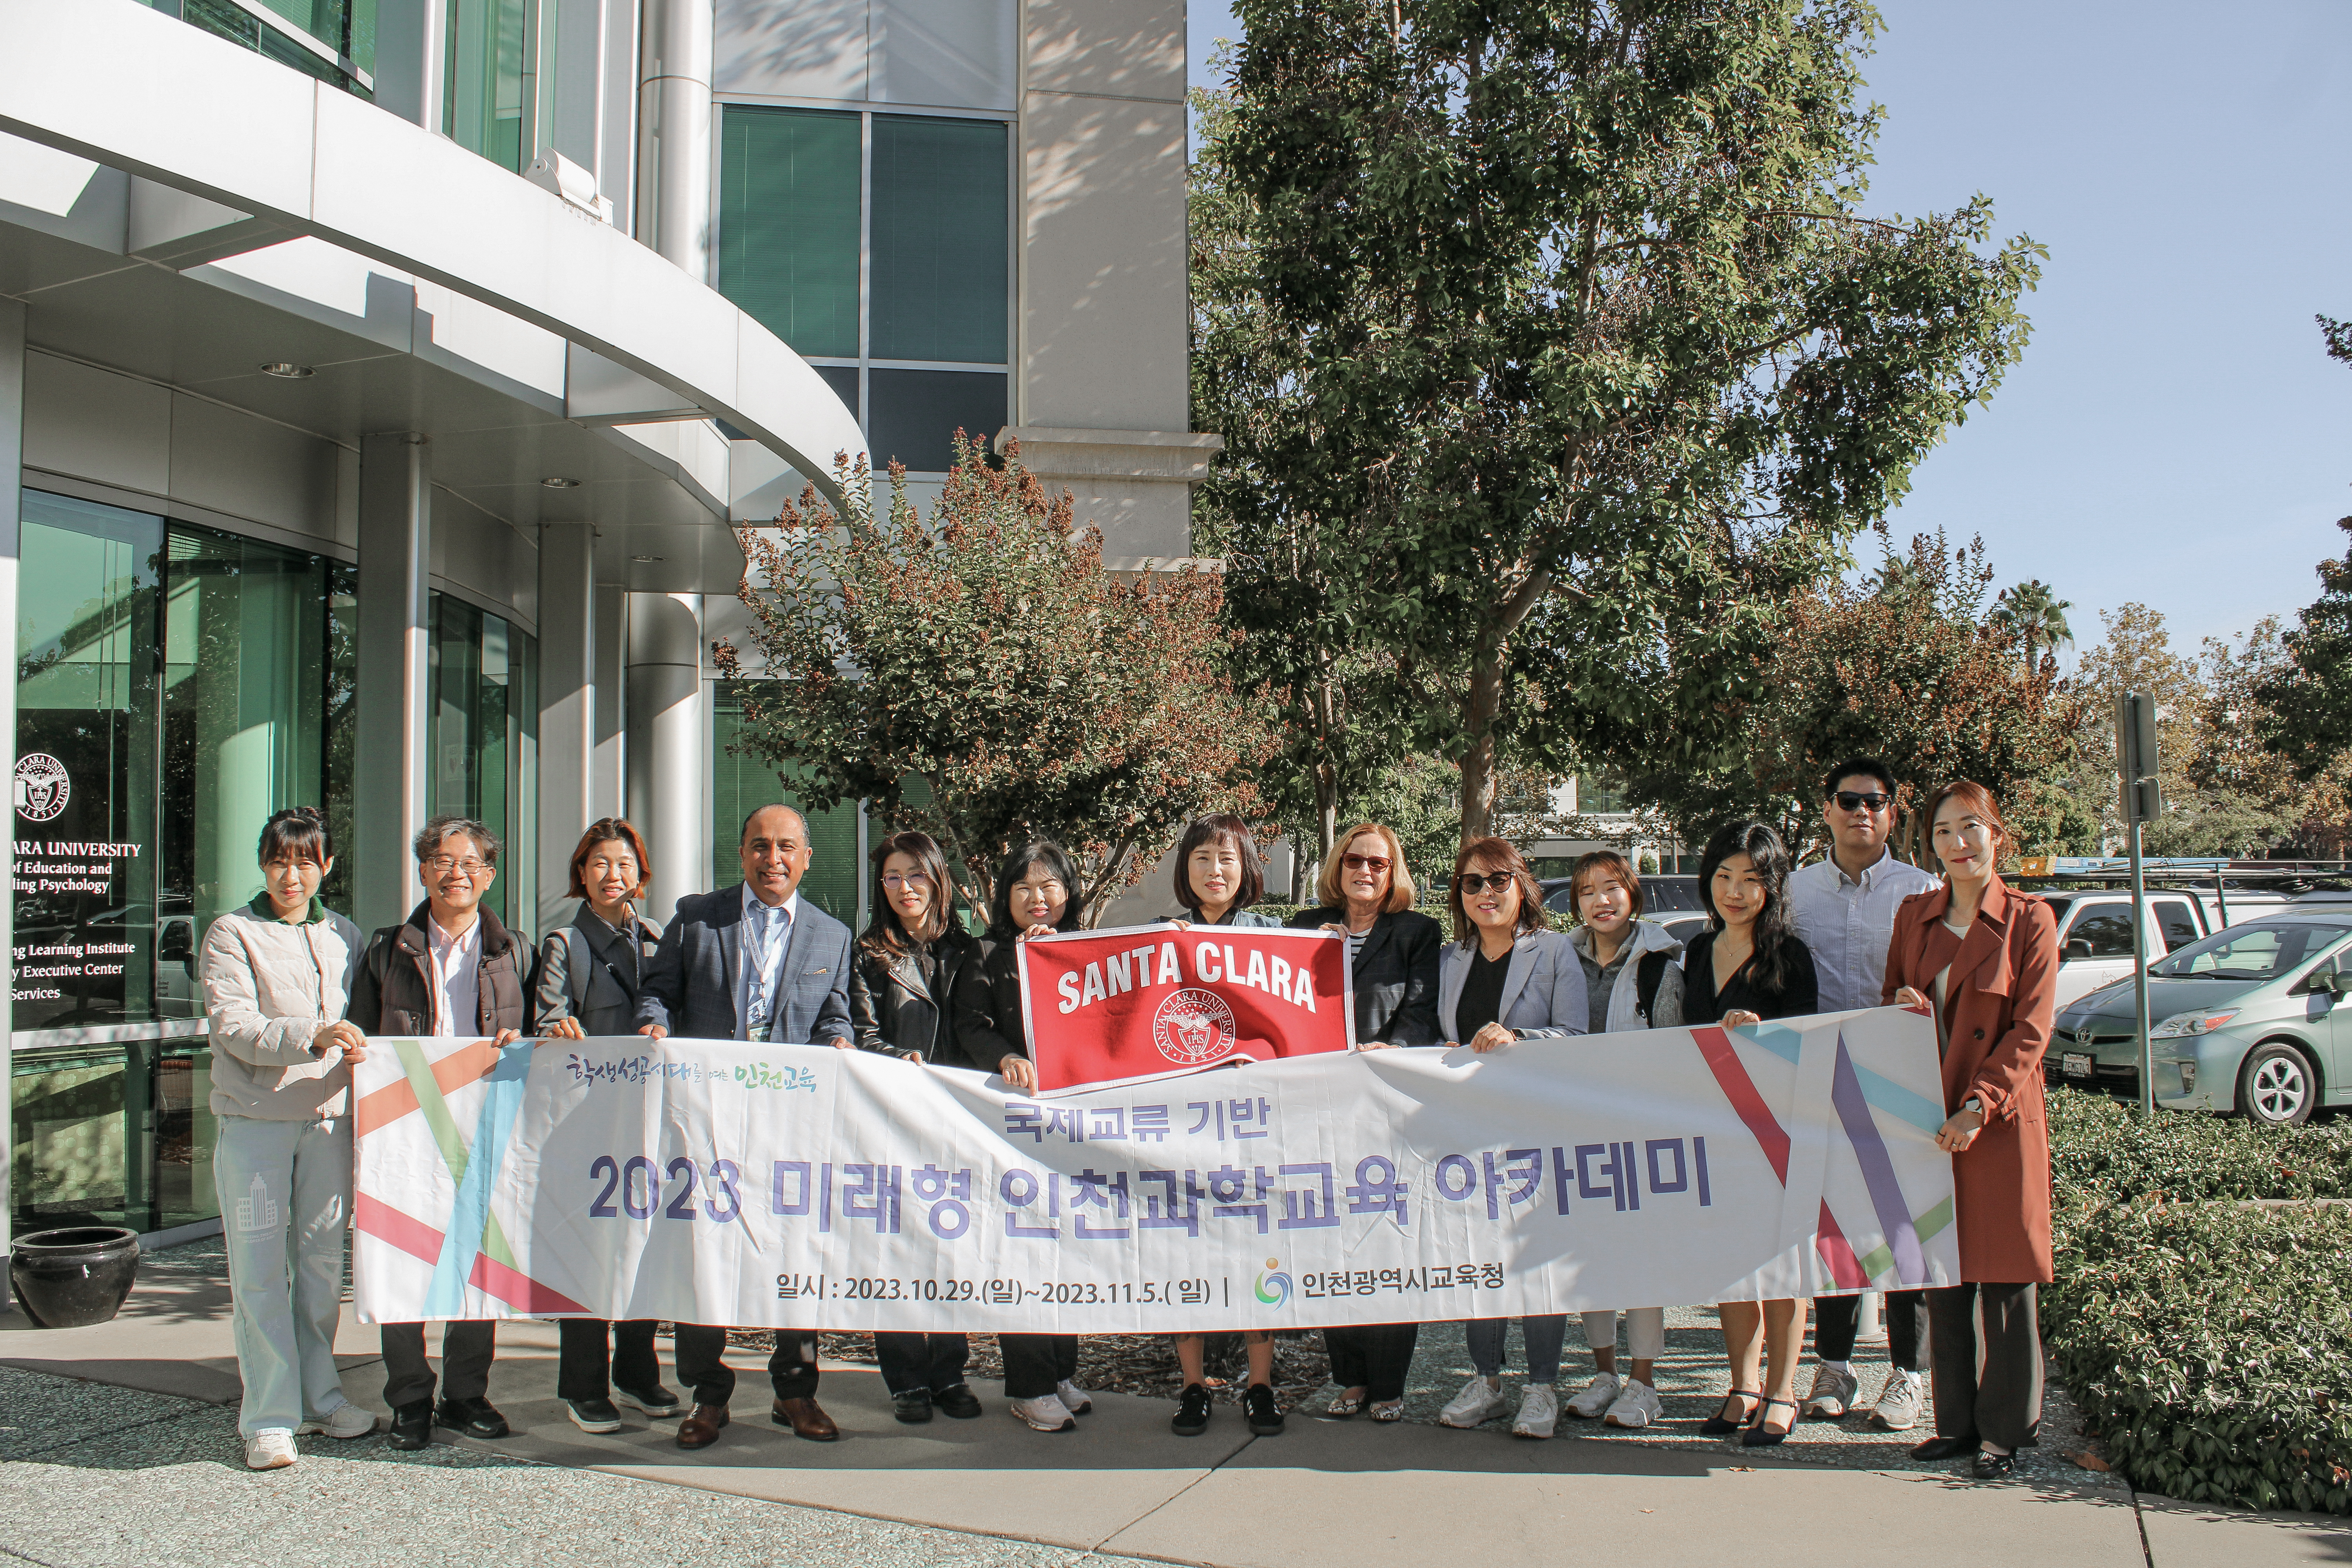 Dr. Won Jung Kim welcomes educators from Korea to campus for a science education workshop.